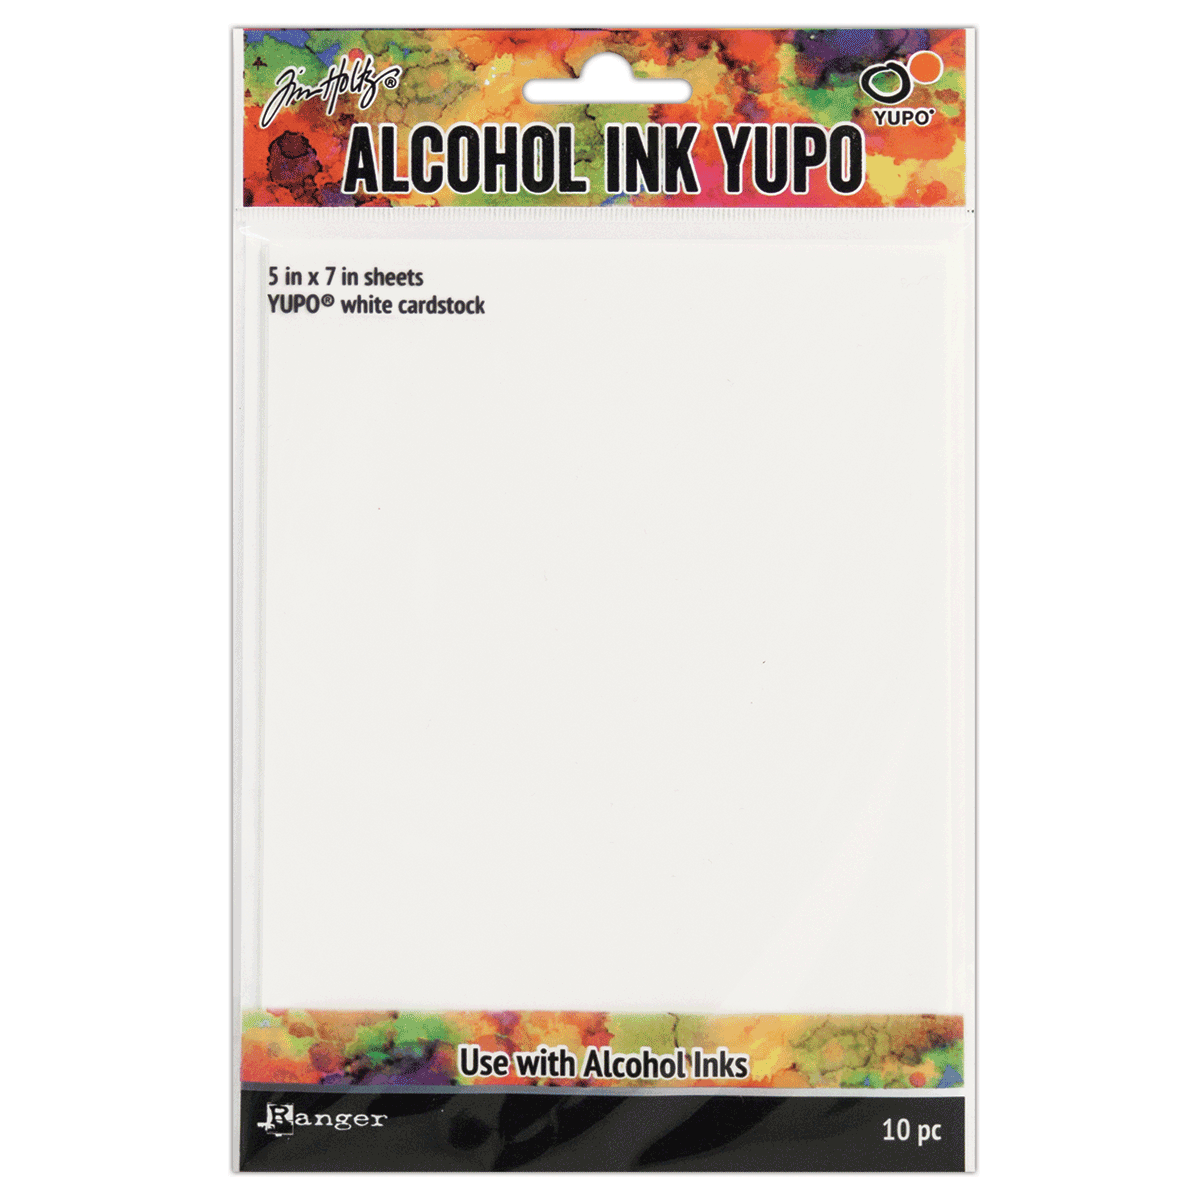 Tim Holtz Alcohol Ink Yupo (White cardstock) 5 x 7 in